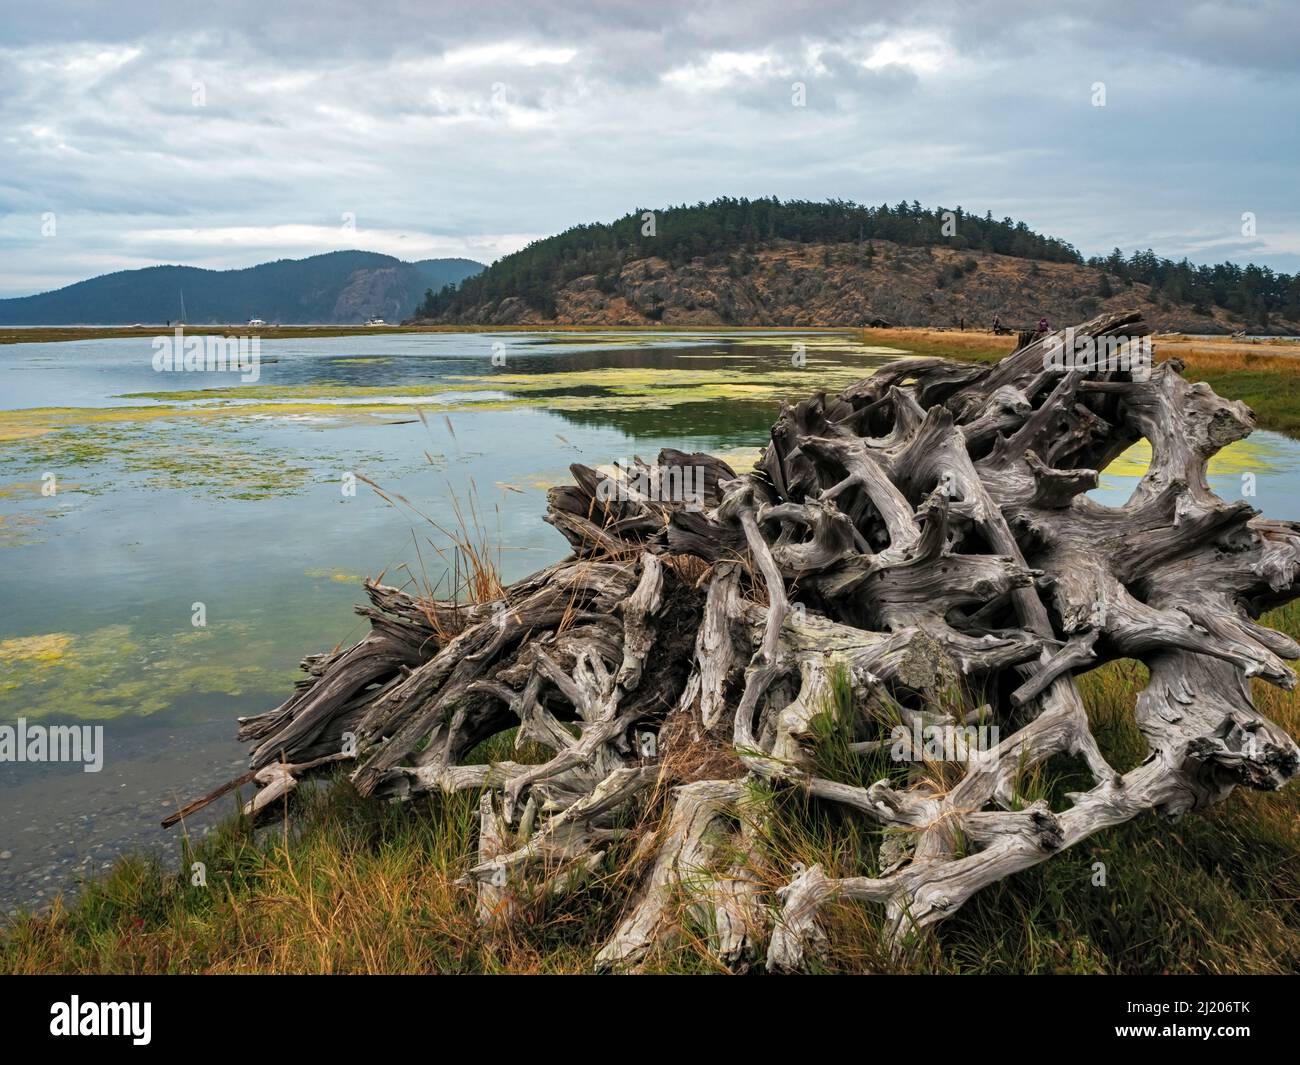 WA21177-00...WASHINGTON - Large root ball beached on the shore of Spencer Spit and its salt-chuck lagoon at Spencer Spit State Park on Lopez Island. Stock Photo